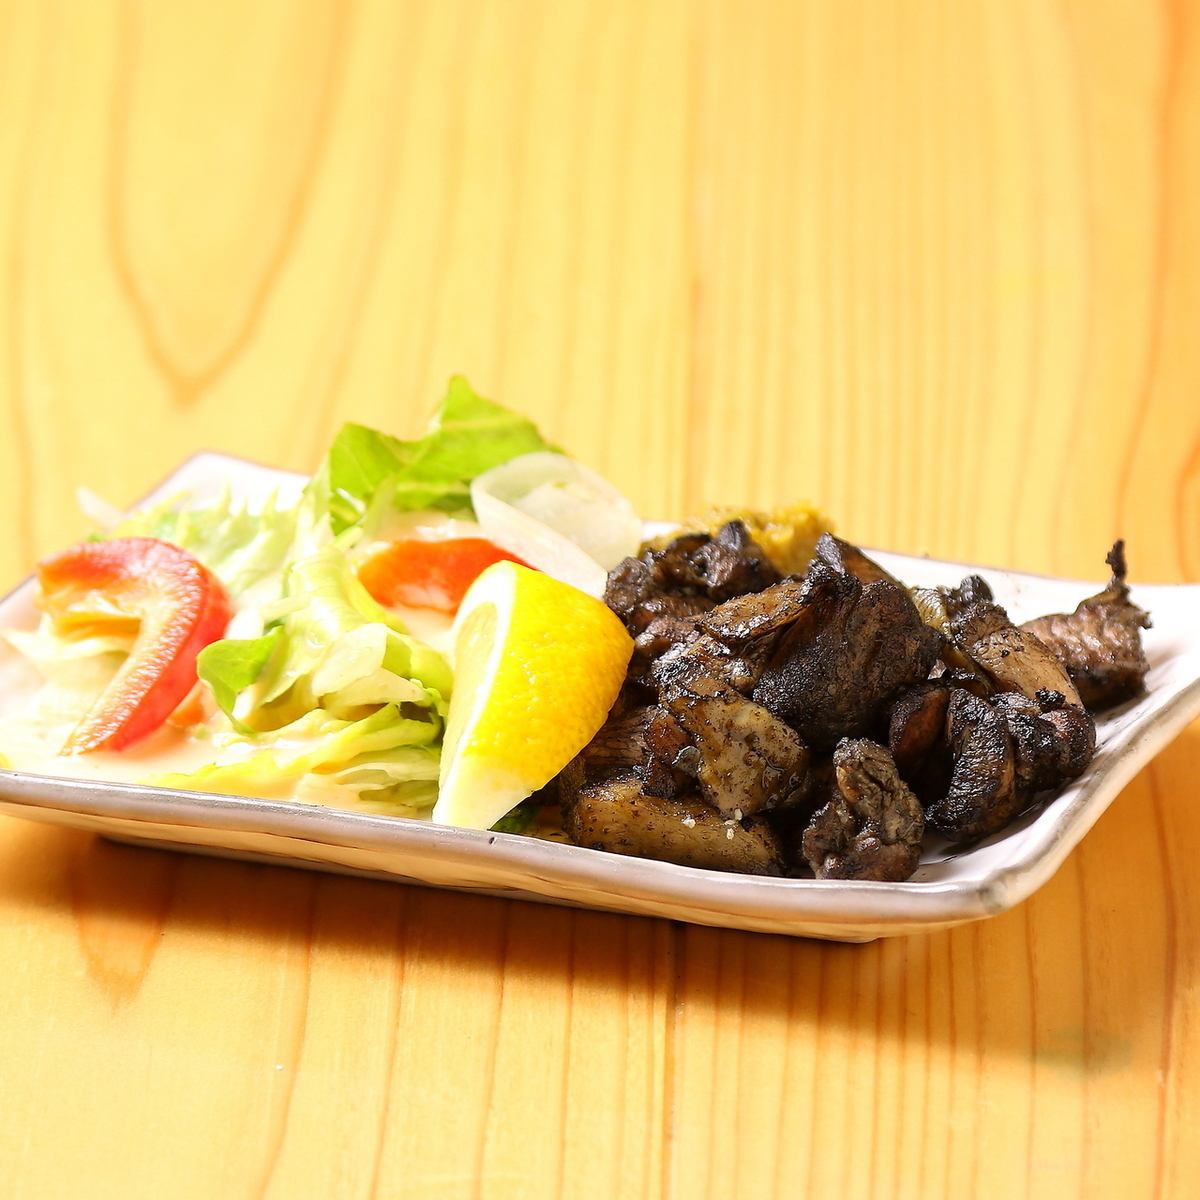 Charcoal-grilled cuisine that fills your mouth with the flavor of charcoal